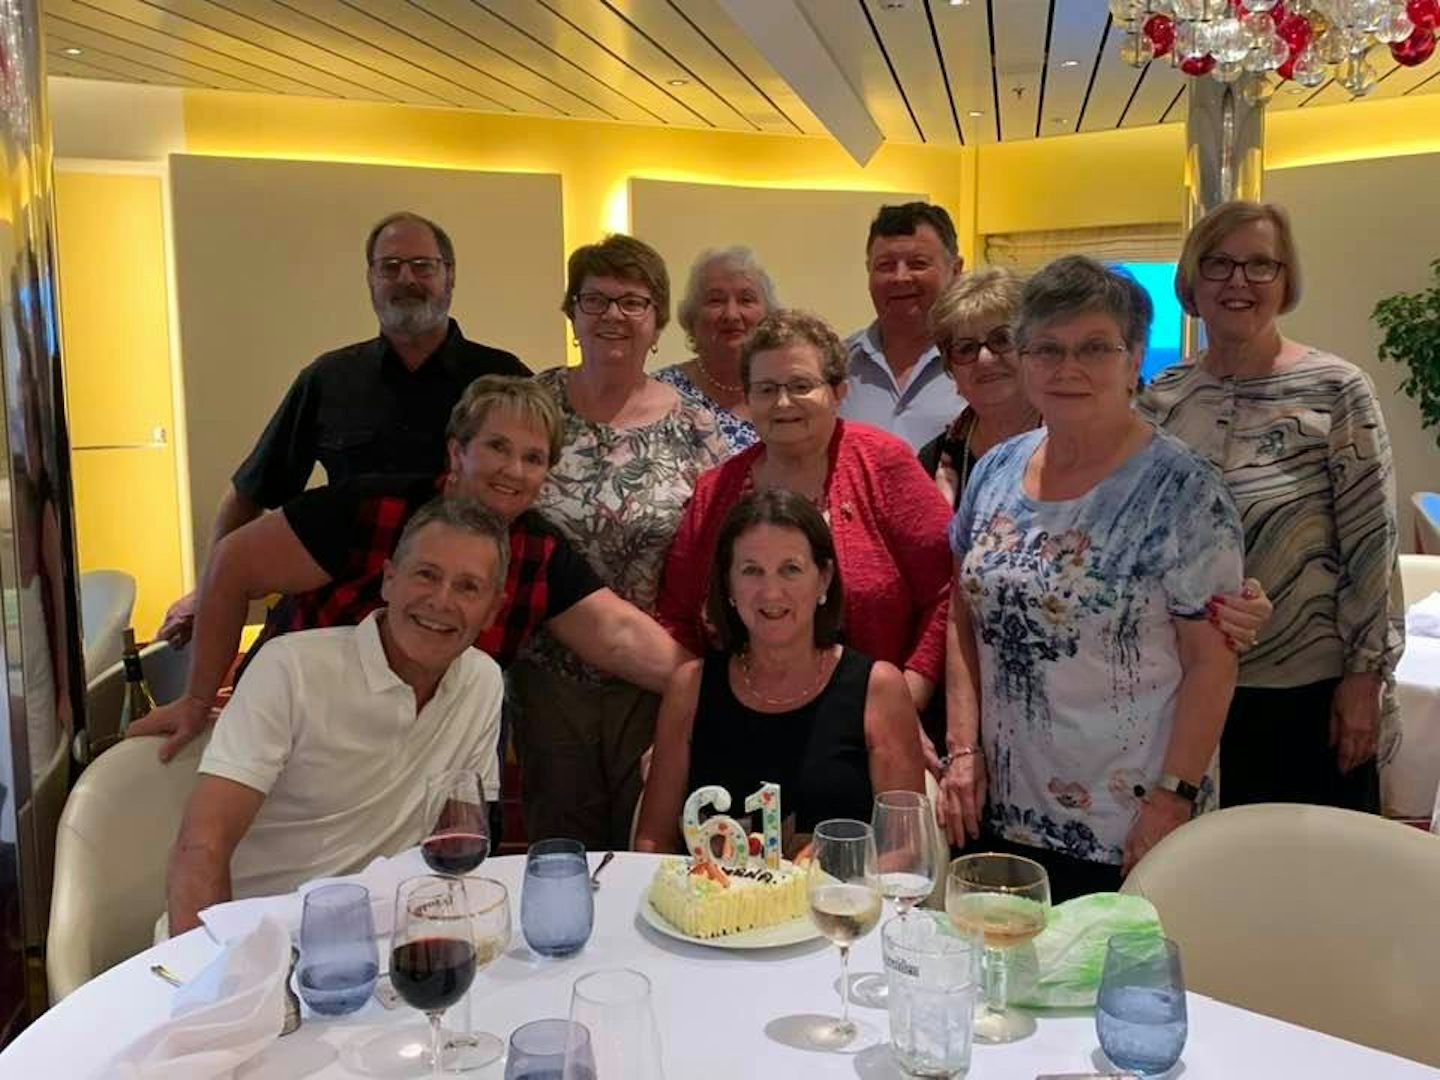 Our group of 11 celebrating my cousin’s 61st birthday. A cake was provide